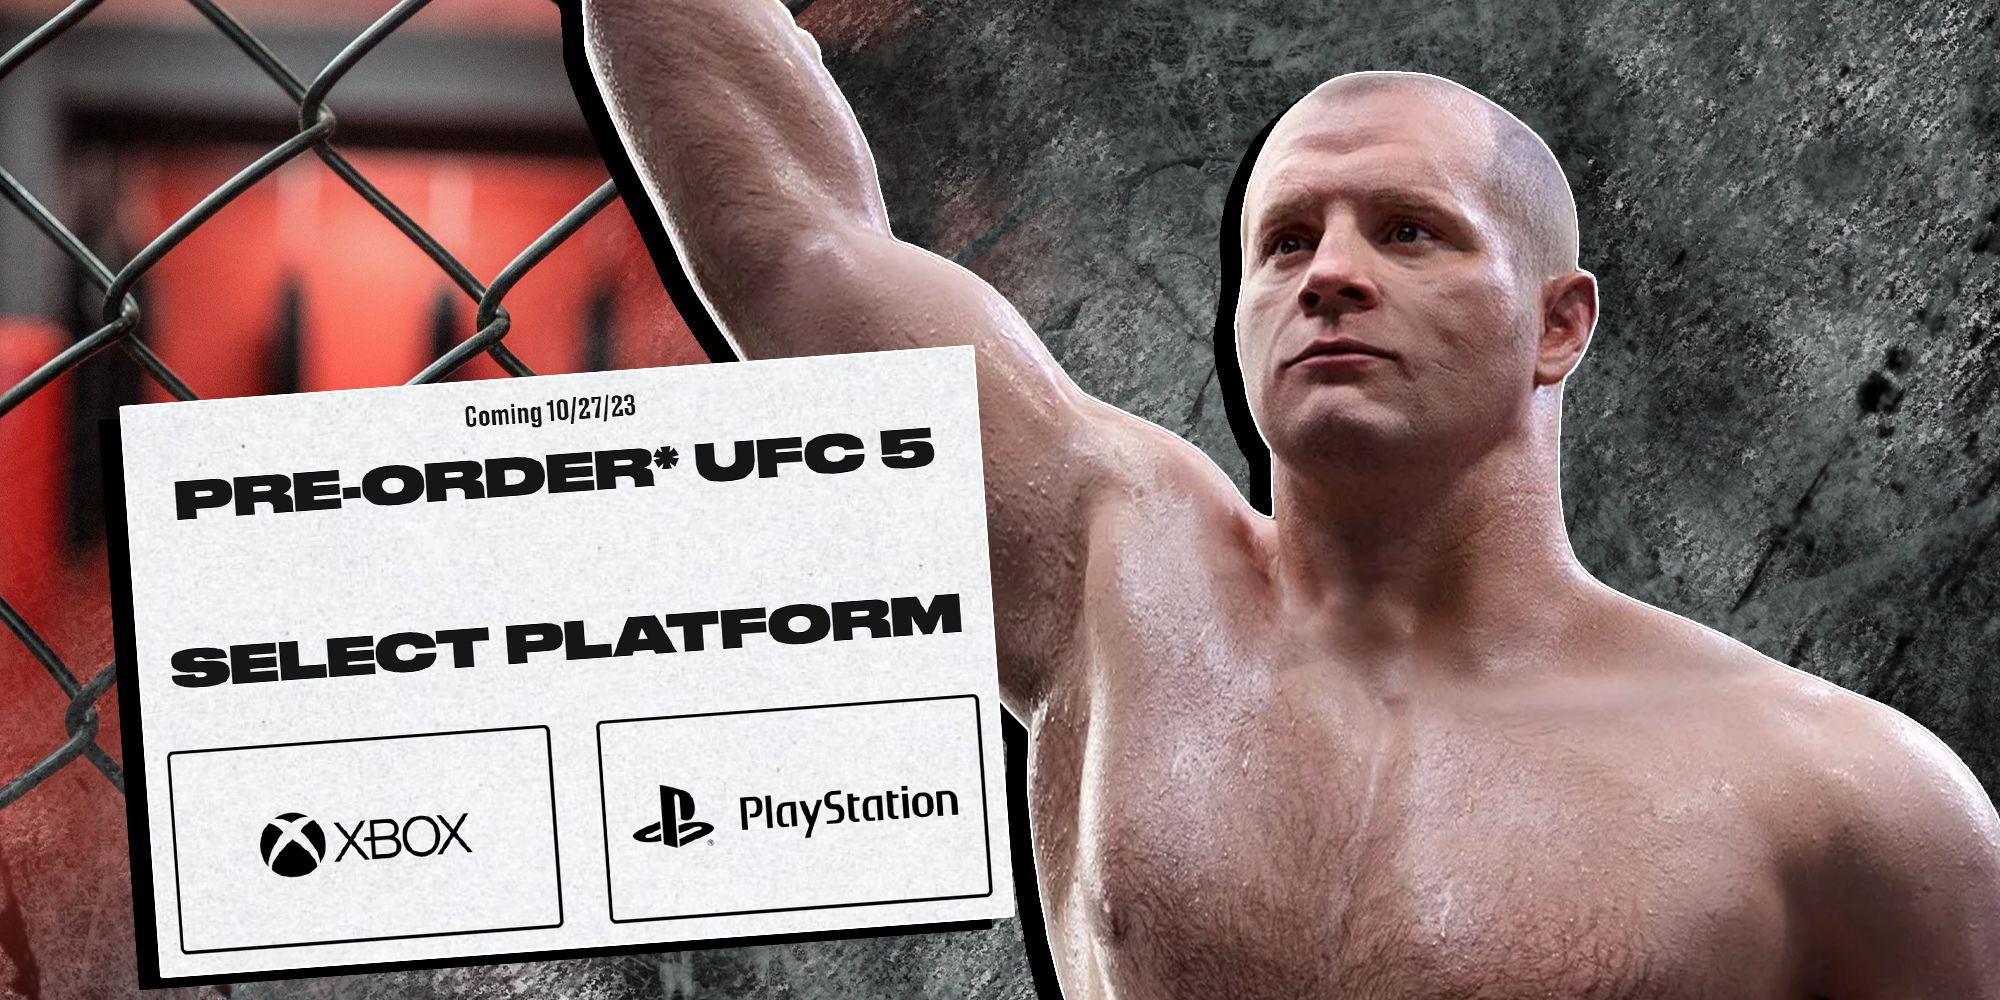 ufc 5 pre-order details and in-game fighter raising his hand